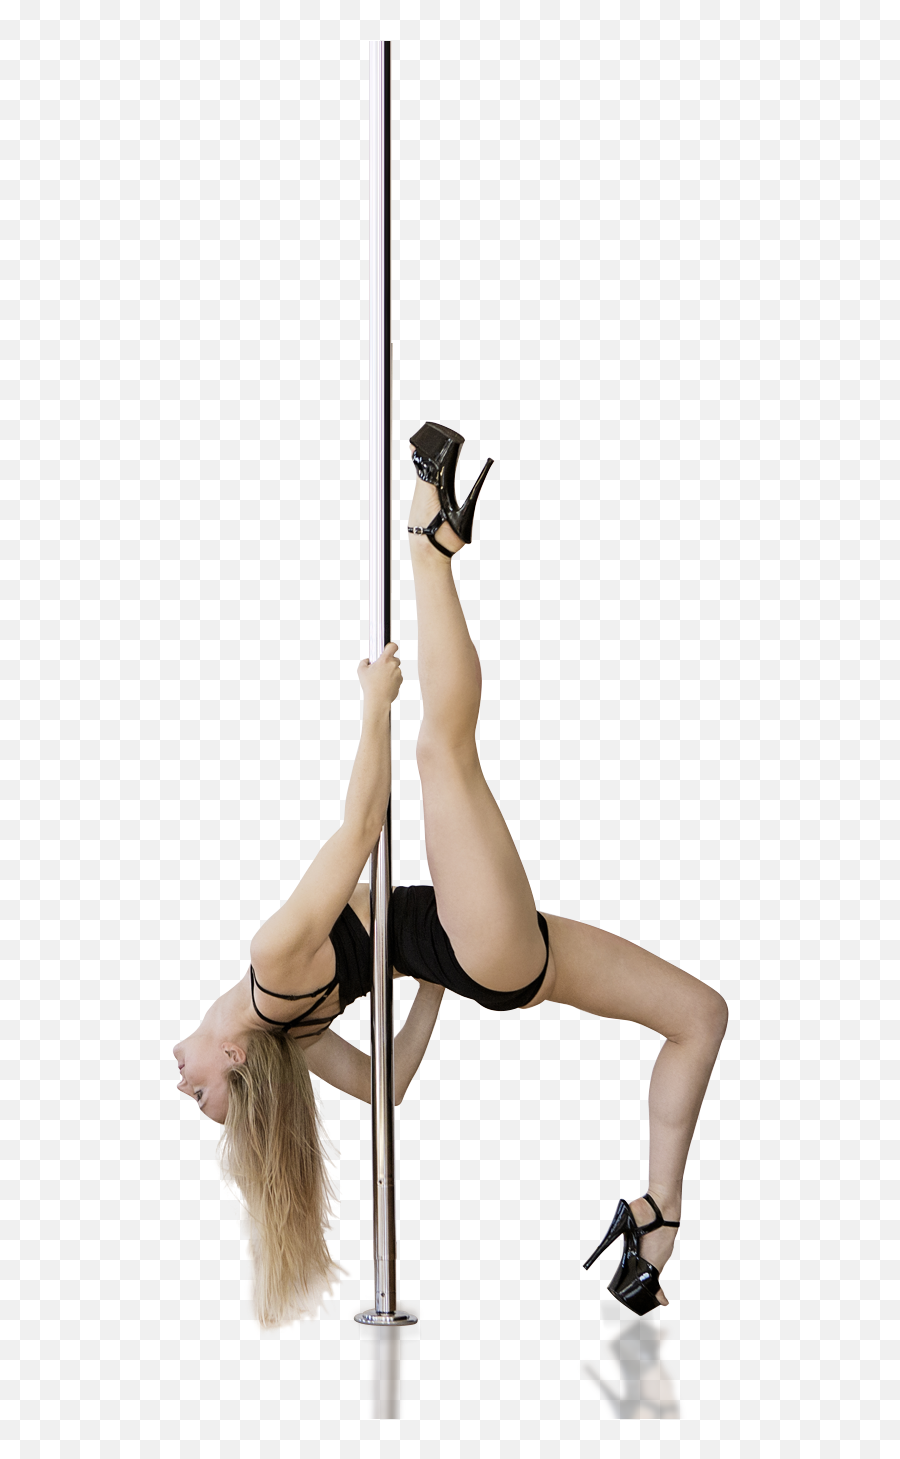 Download Pole Dance Png Image With No Background - Pngkeycom Stripper On S Pole,Stripper Pole Png